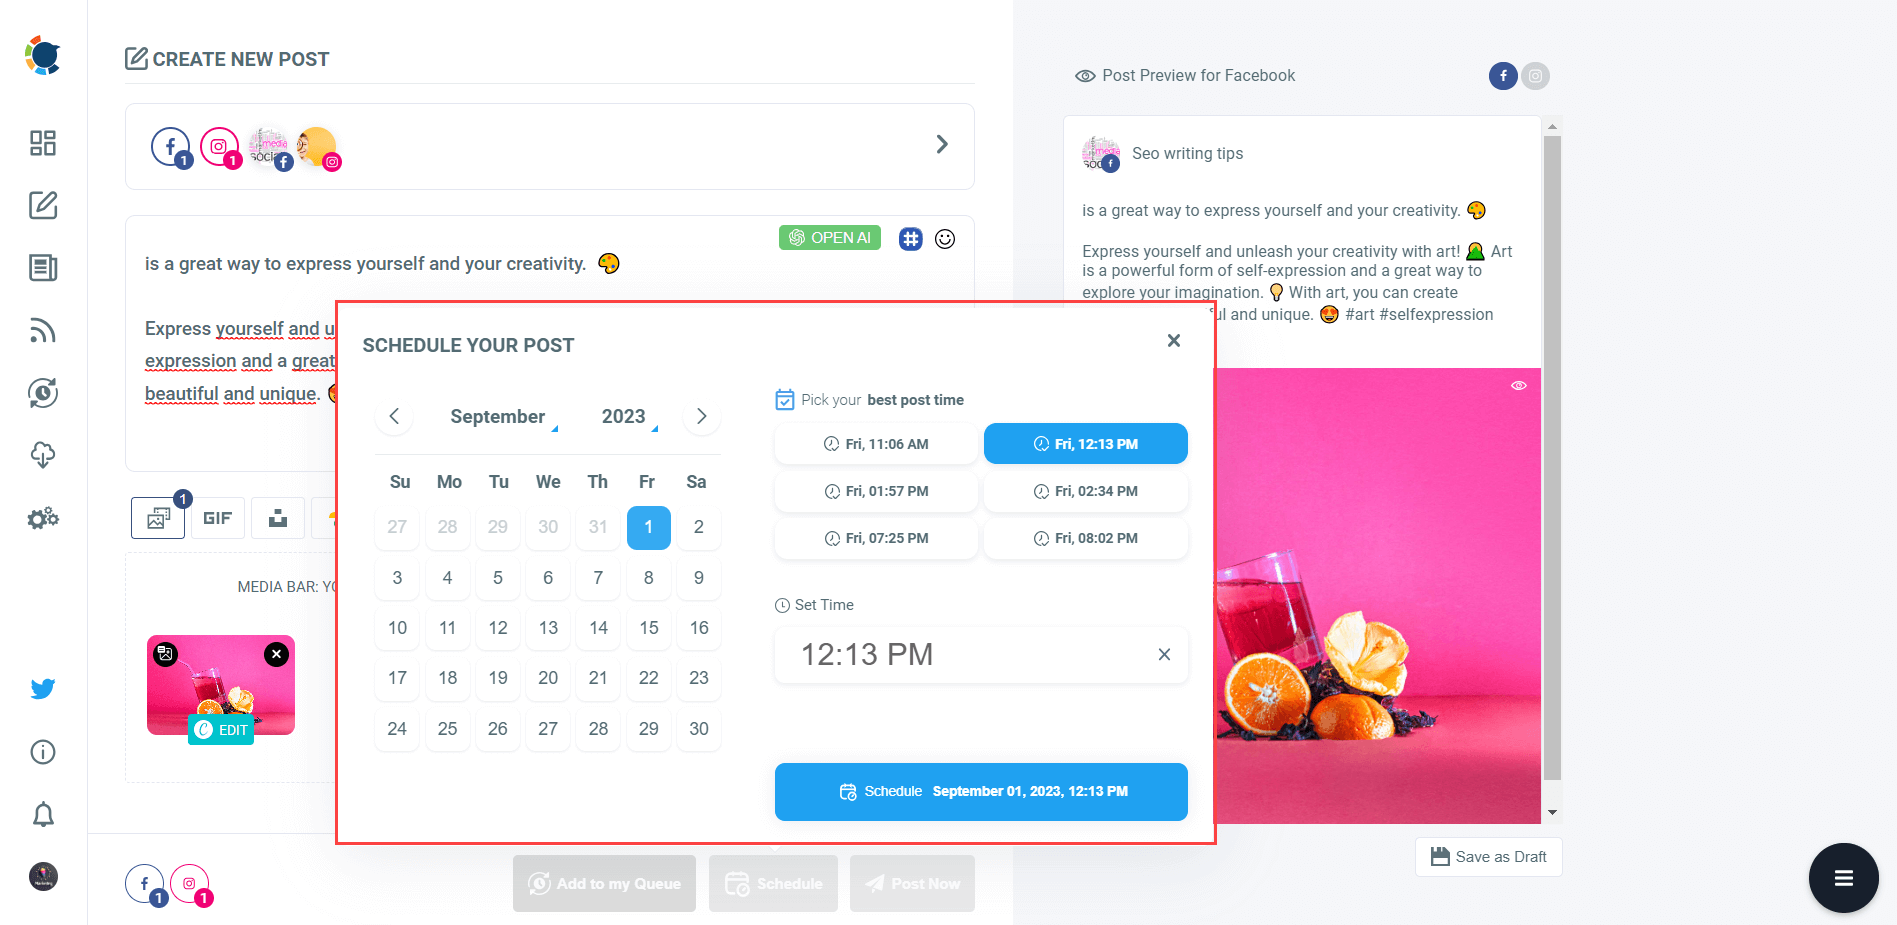 Schedule your posts at the best times to post